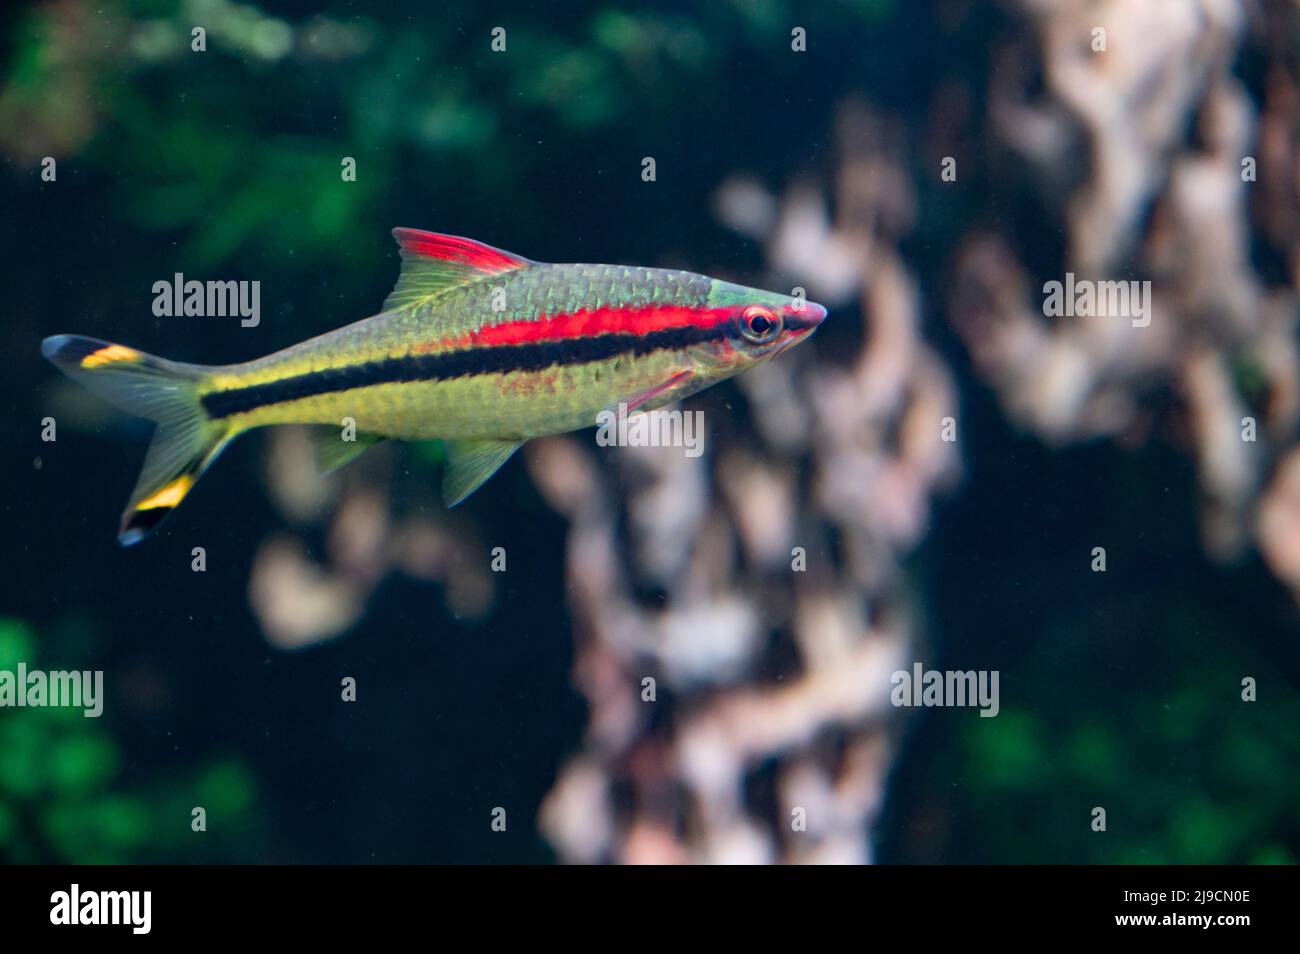 Colorful tetra fish in hobby auqarium with green water plants Stock Photo